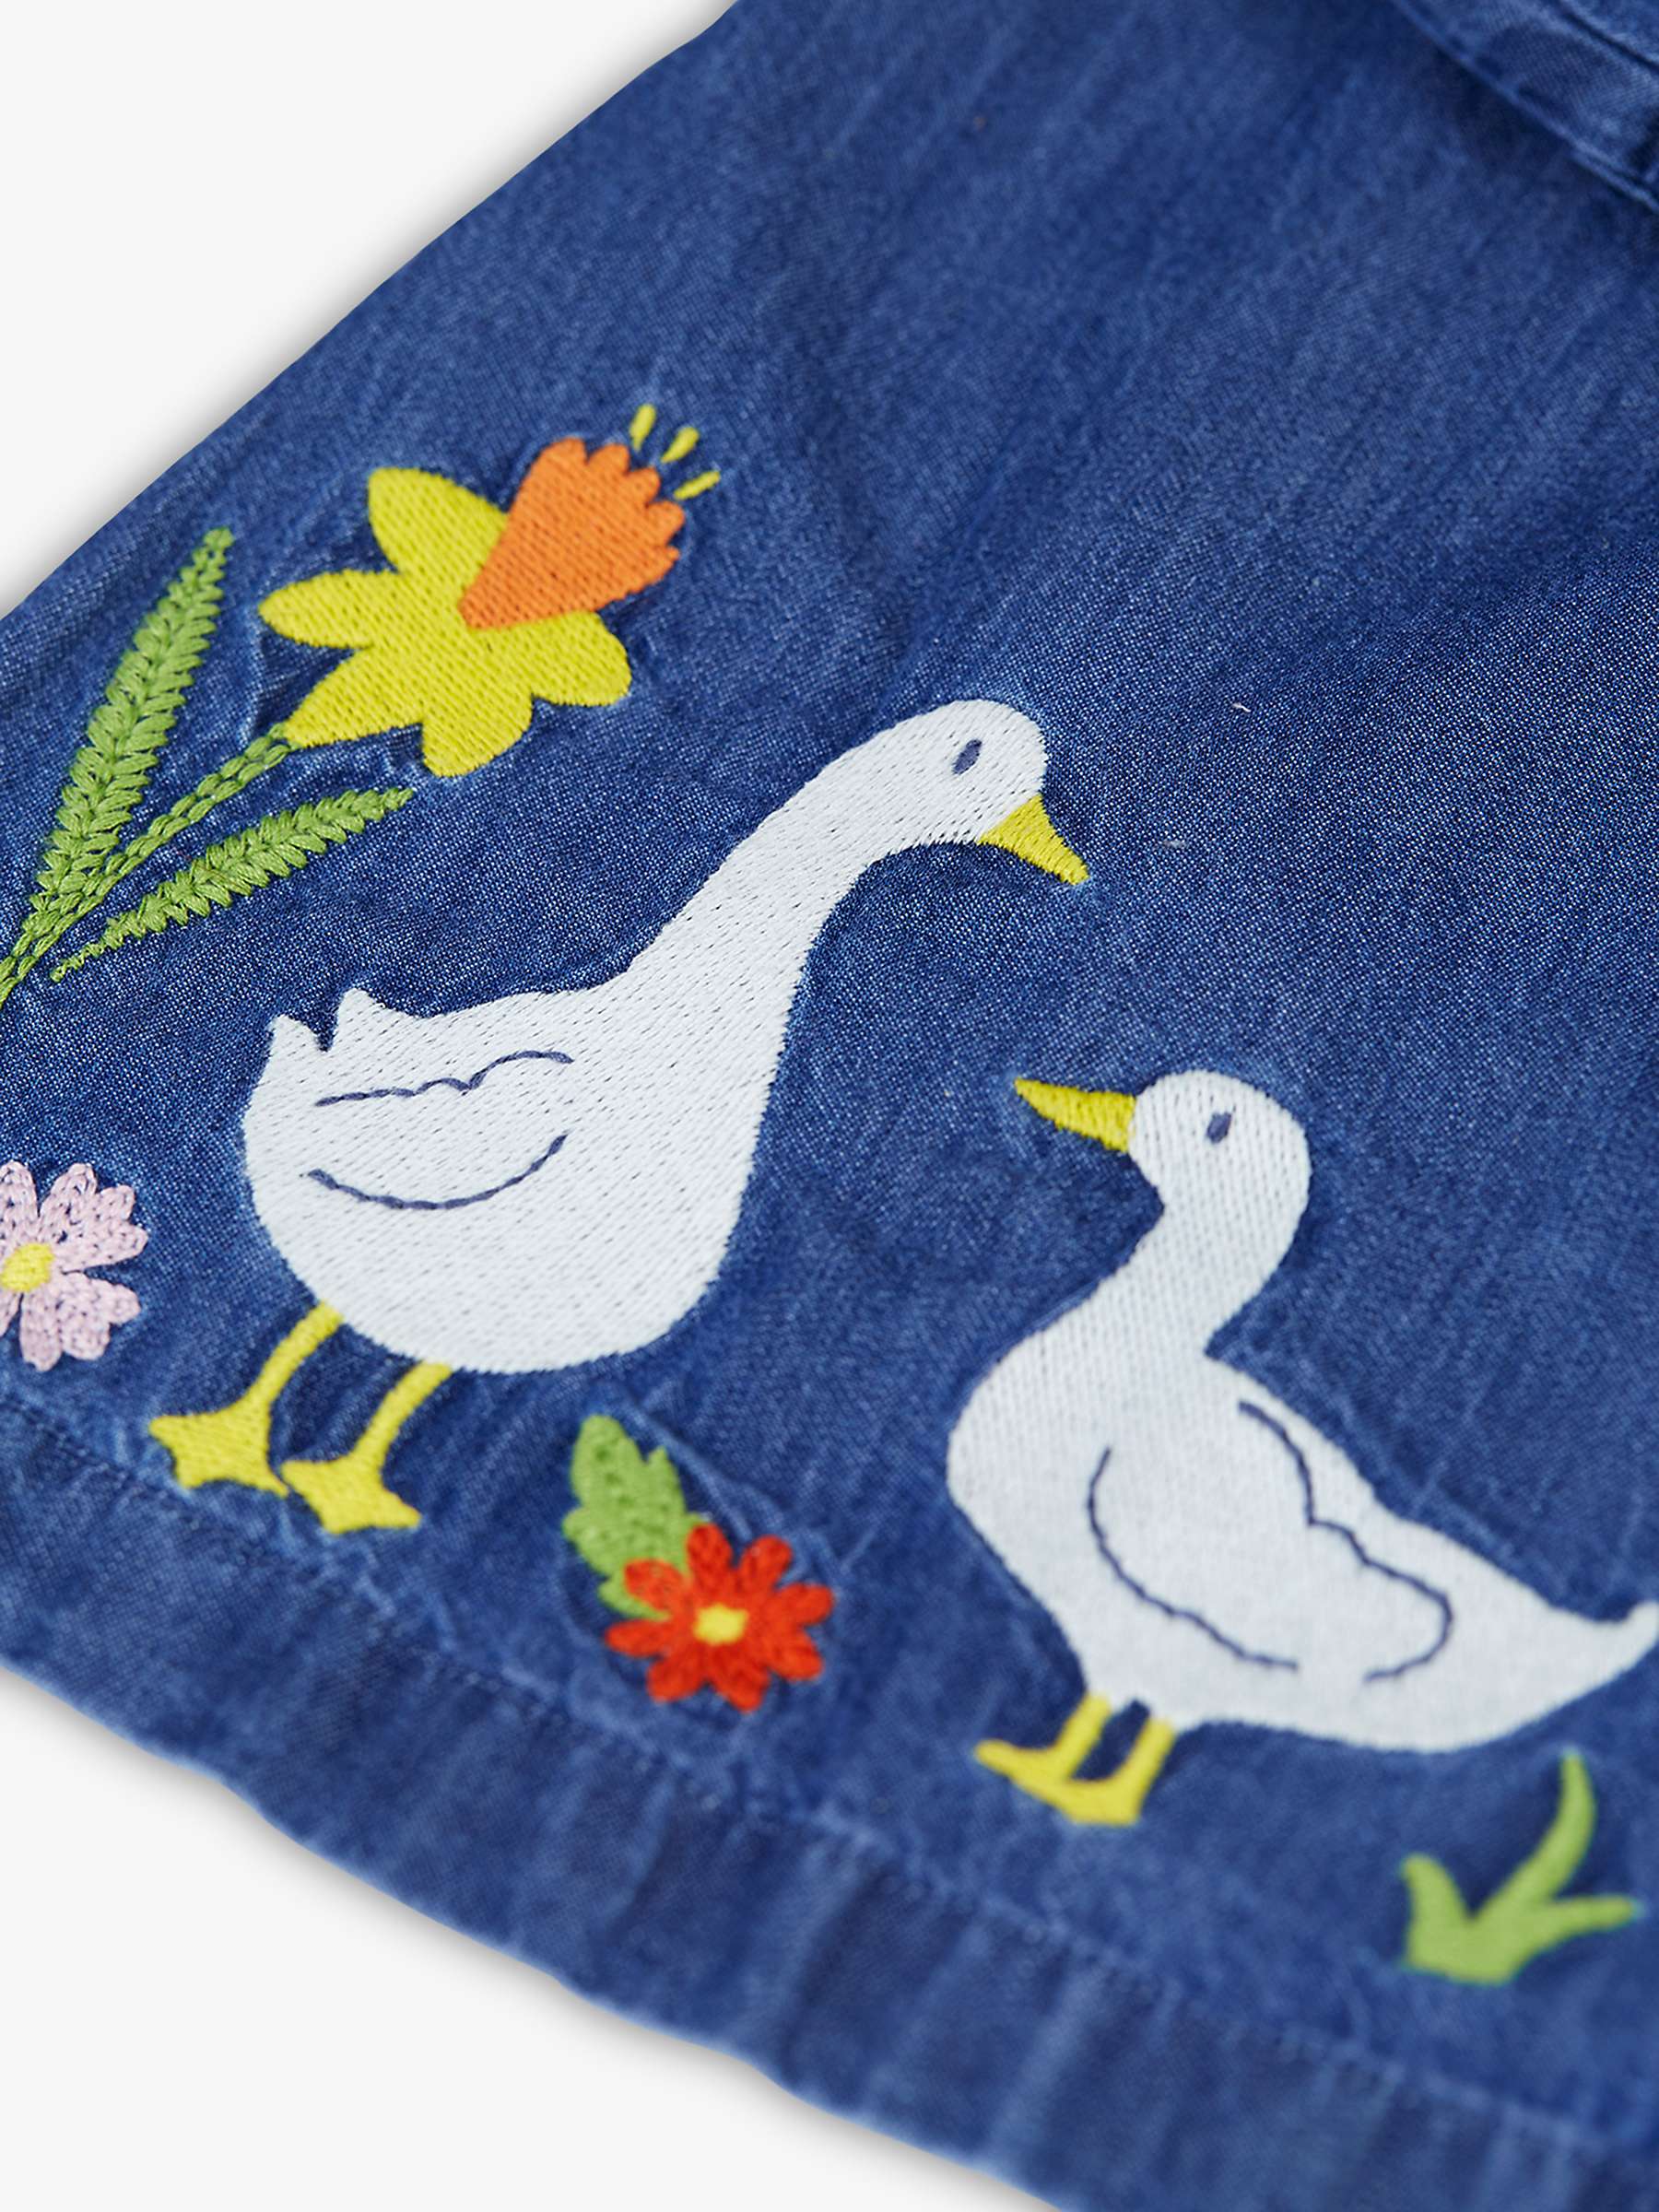 Buy Frugi Baby Organic Cotton Emma Duck Applique Chambray Dress, Blue Online at johnlewis.com